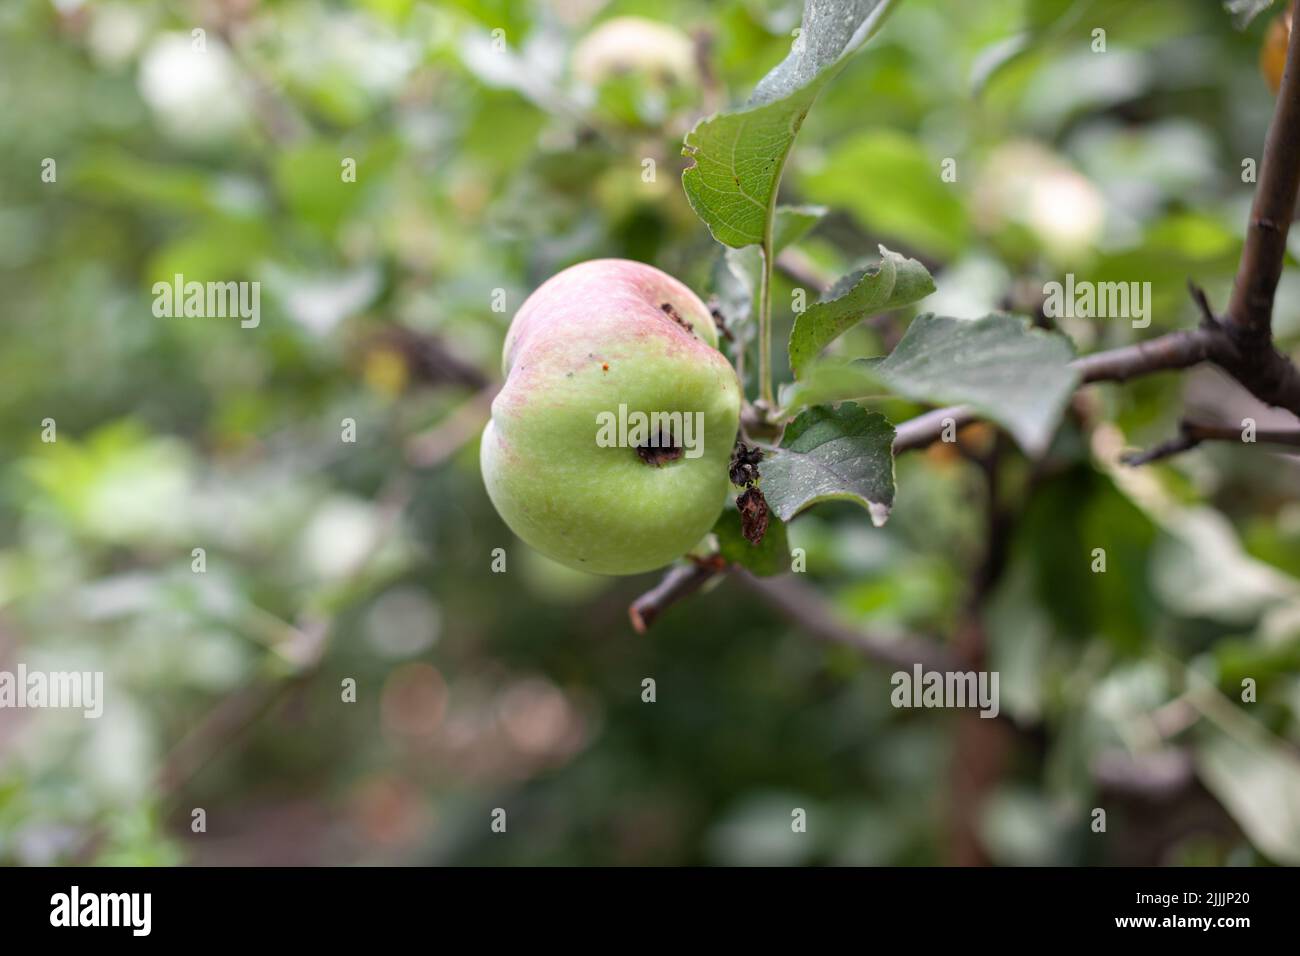 A green worm-eaten apple weighs on a tree branch in the garden. An apple affected by the disease, on a branch of an apple tree in the garden. A sick s Stock Photo